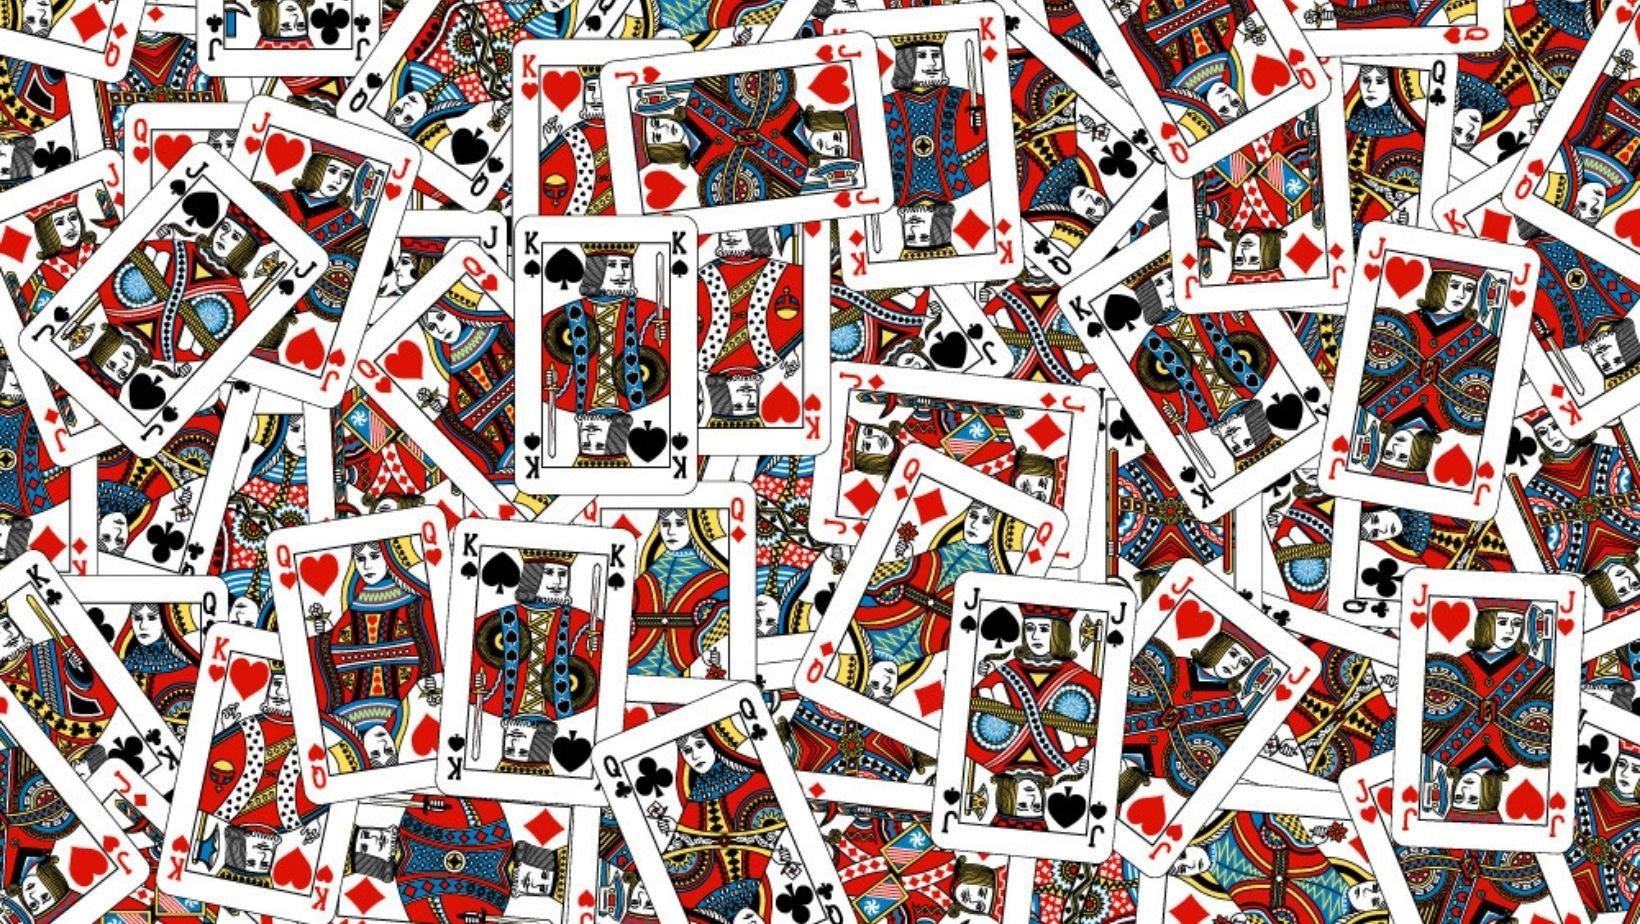 small joys thumbnail 1 8.jpg?resize=412,232 - How Fast Can You Find The ONE-EYED JACK In This Deck?